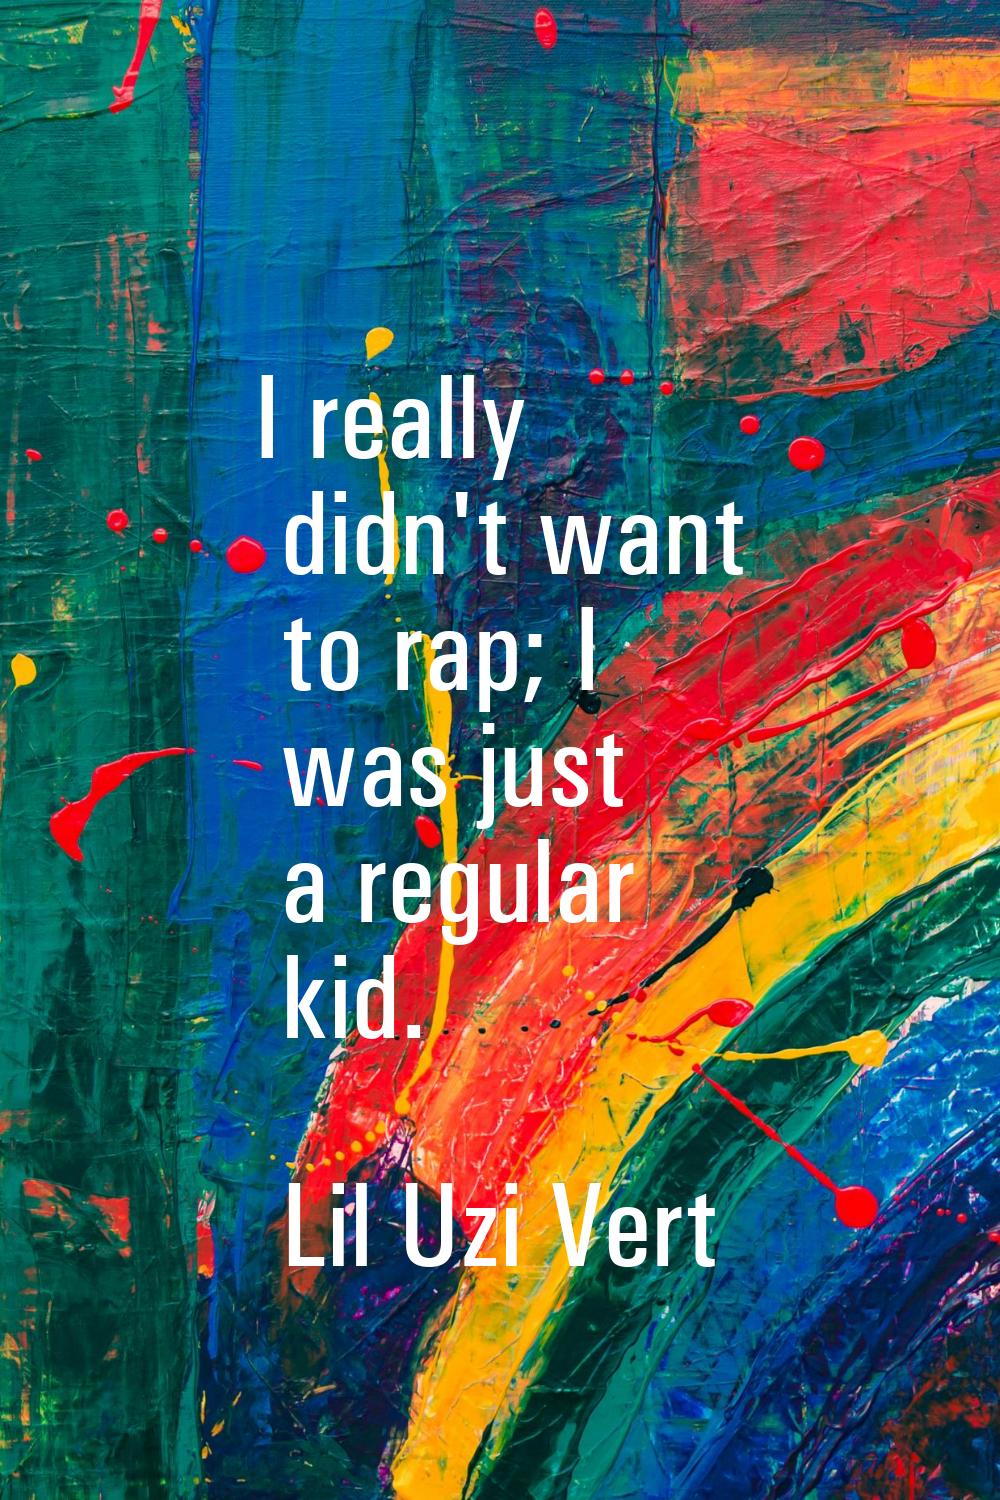 I really didn't want to rap; I was just a regular kid.